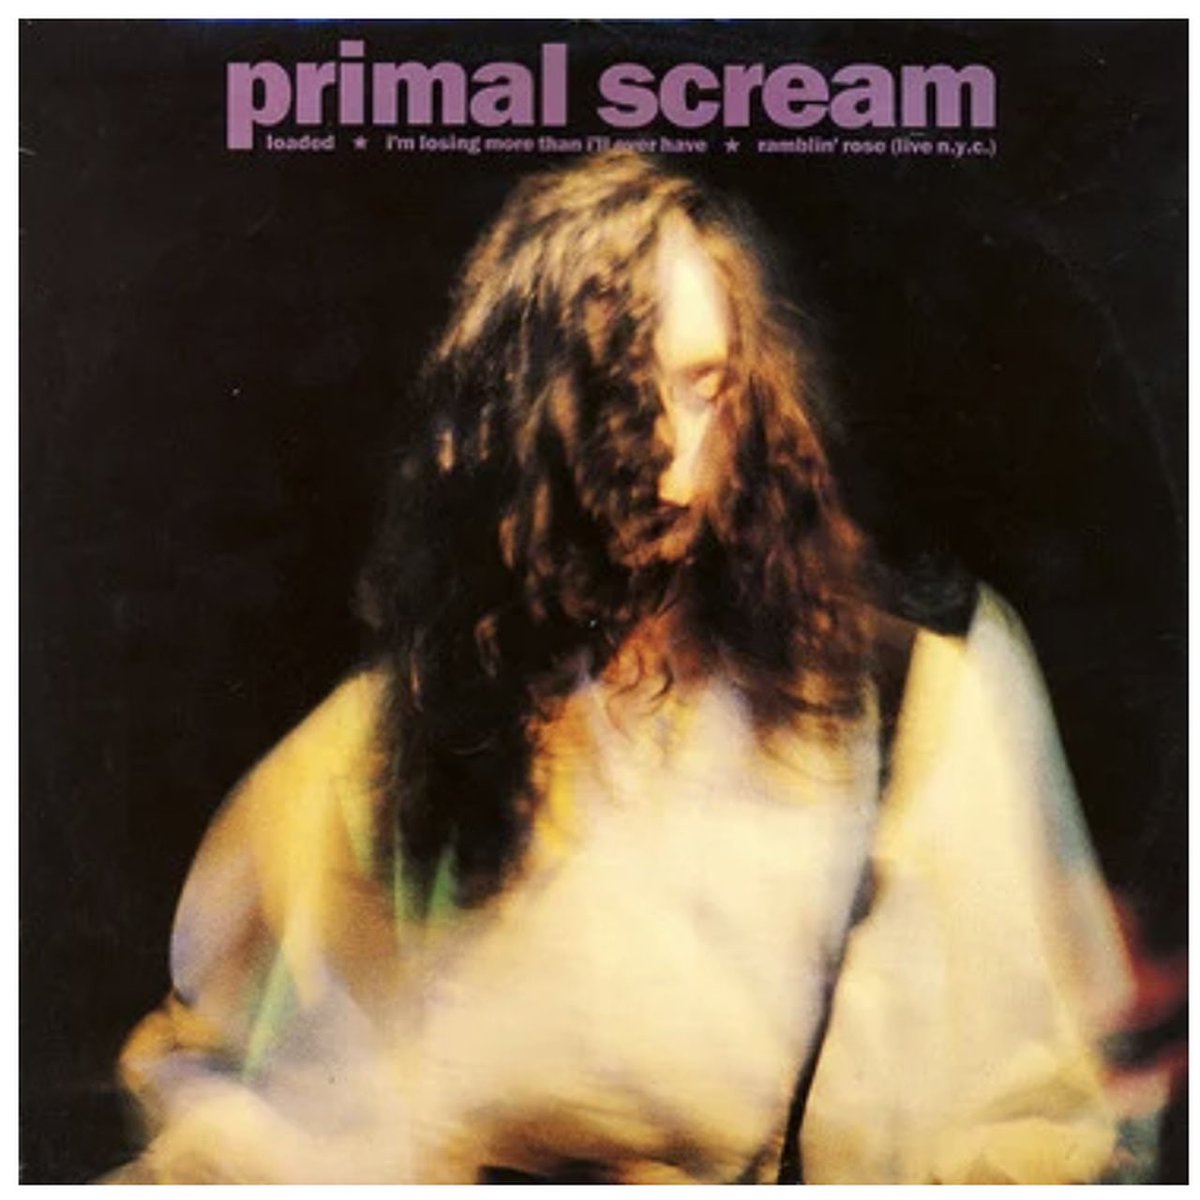 Currently trapped with a baby on my lap, so who wants to join me in a look at what makes up Loaded by Primal Scream? You? Well, ok then...